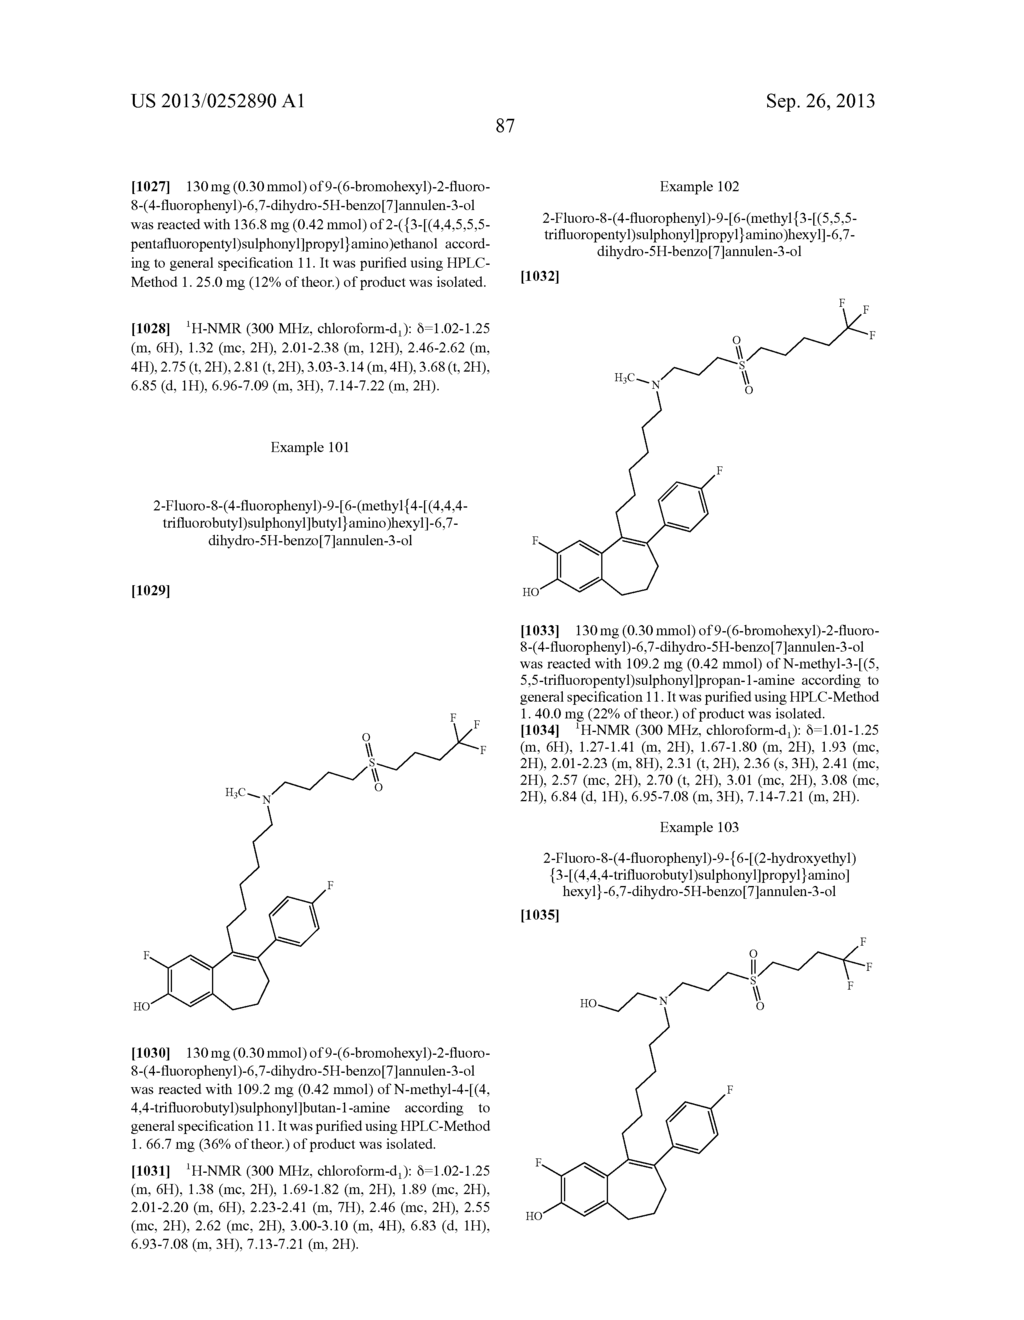 6,7-DIHYDRO-5H-BENZO[7]ANNULENE DERIVATIVES, PROCESS FOR PREPARATION     THEREOF, PHARMACEUTICAL PREPARATIONS COMPRISING THEM, AND THE USE THEREOF     FOR PRODUCTION OF MEDICAMENTS - diagram, schematic, and image 95